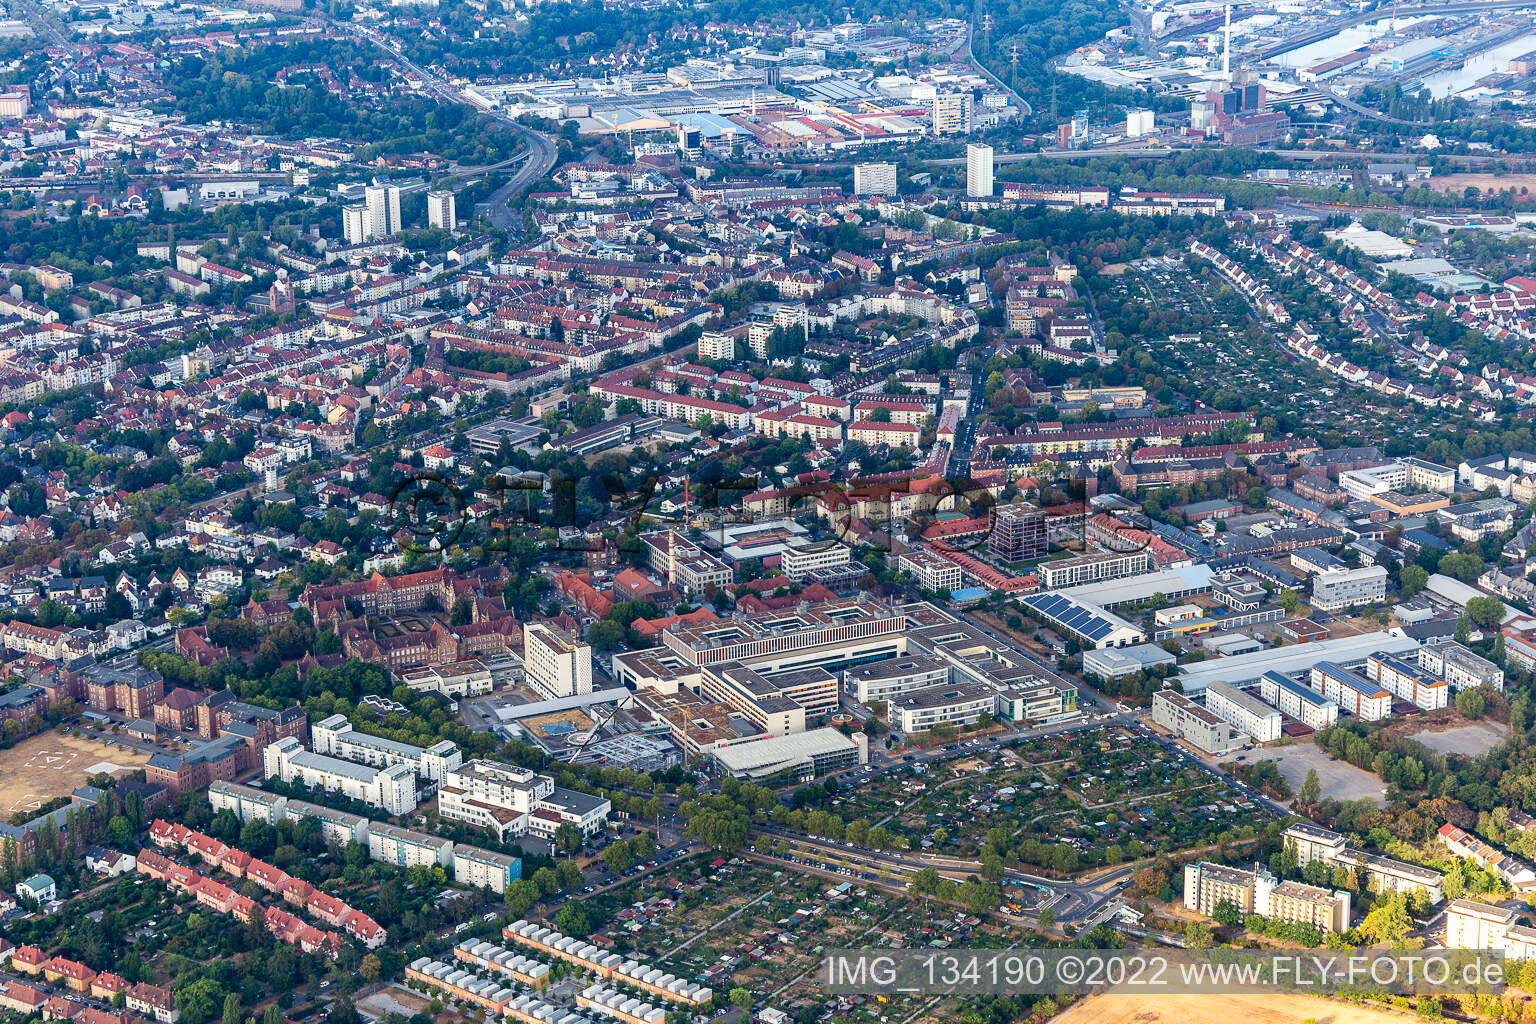 Aerial view of Municipal hospital Karlsruhe in the district Nordweststadt in Karlsruhe in the state Baden-Wuerttemberg, Germany